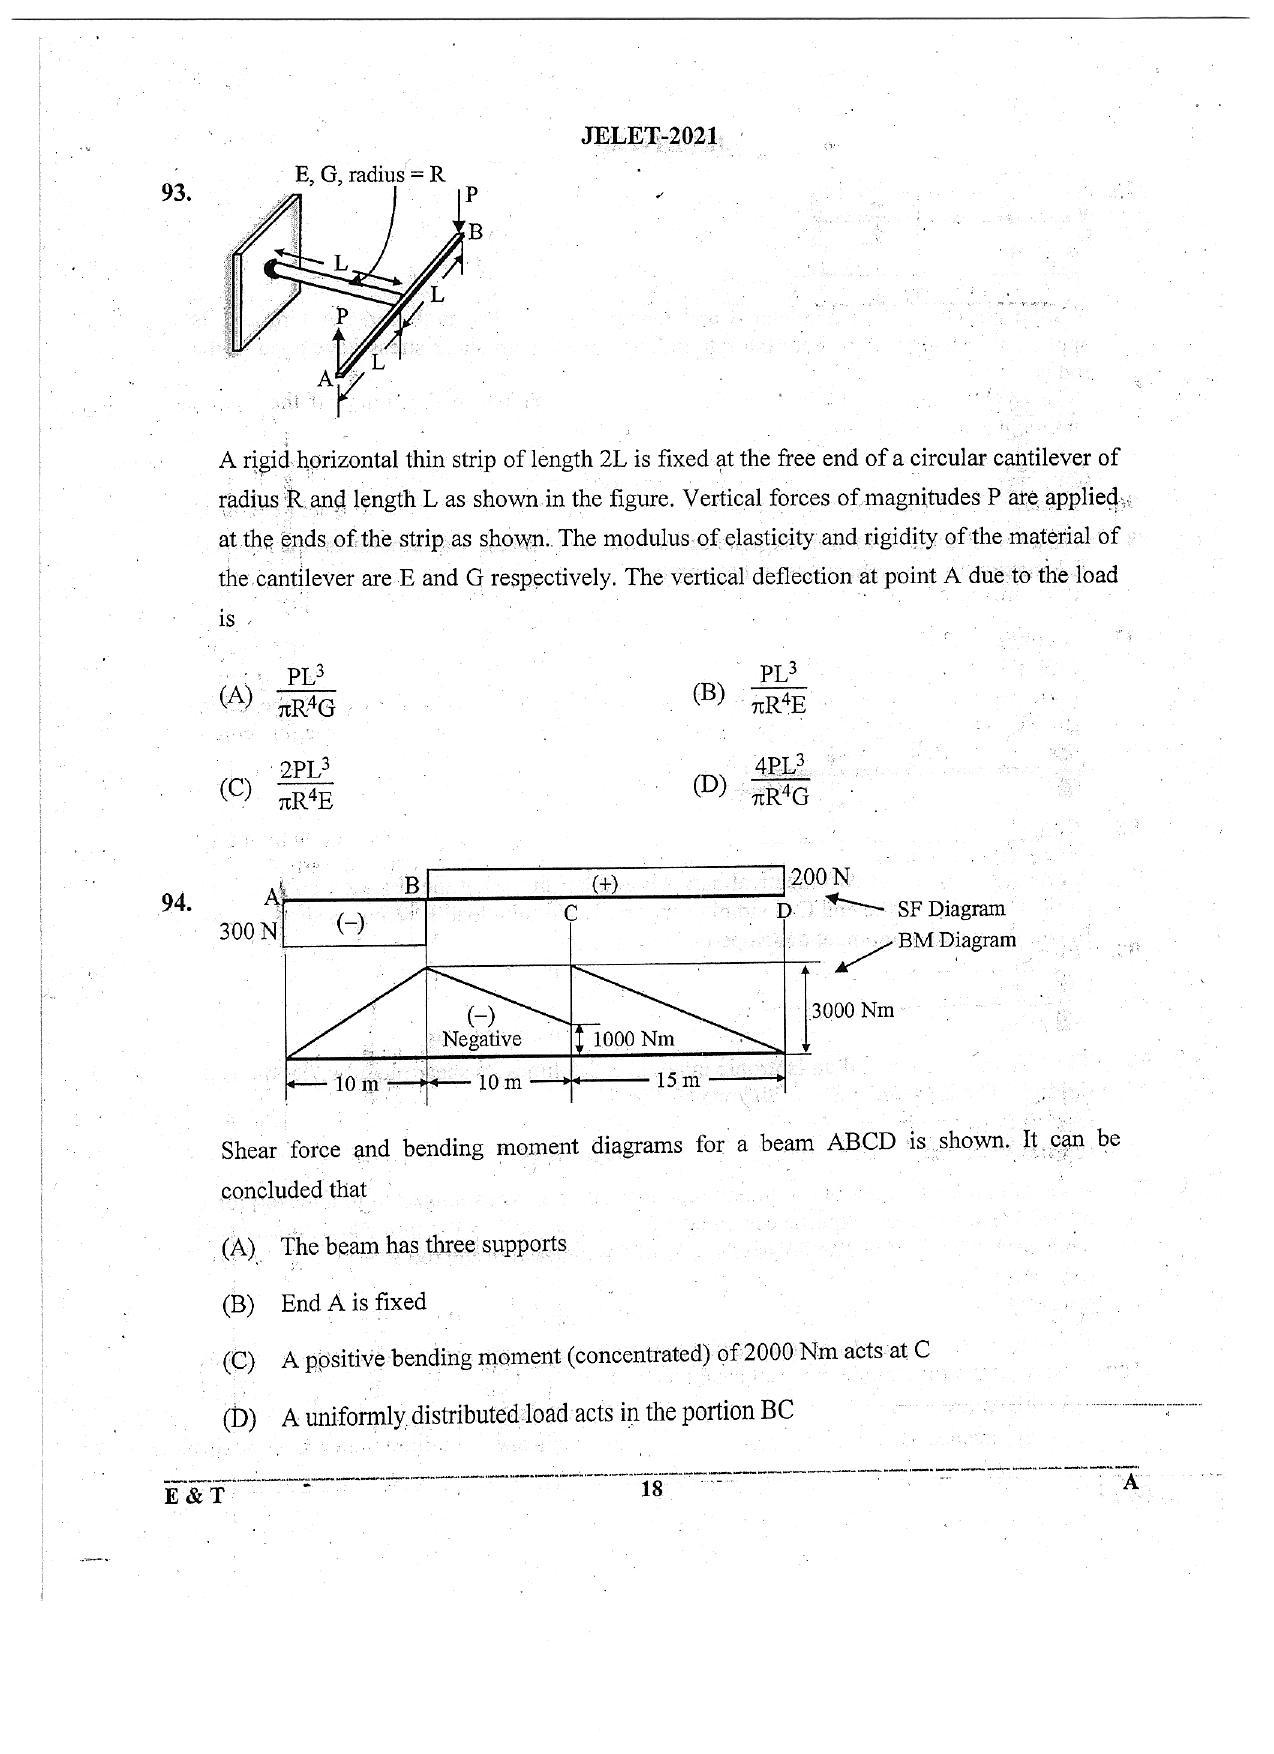 WBJEE  JELET 2021 ( Engg. & Tech.) - Page 18